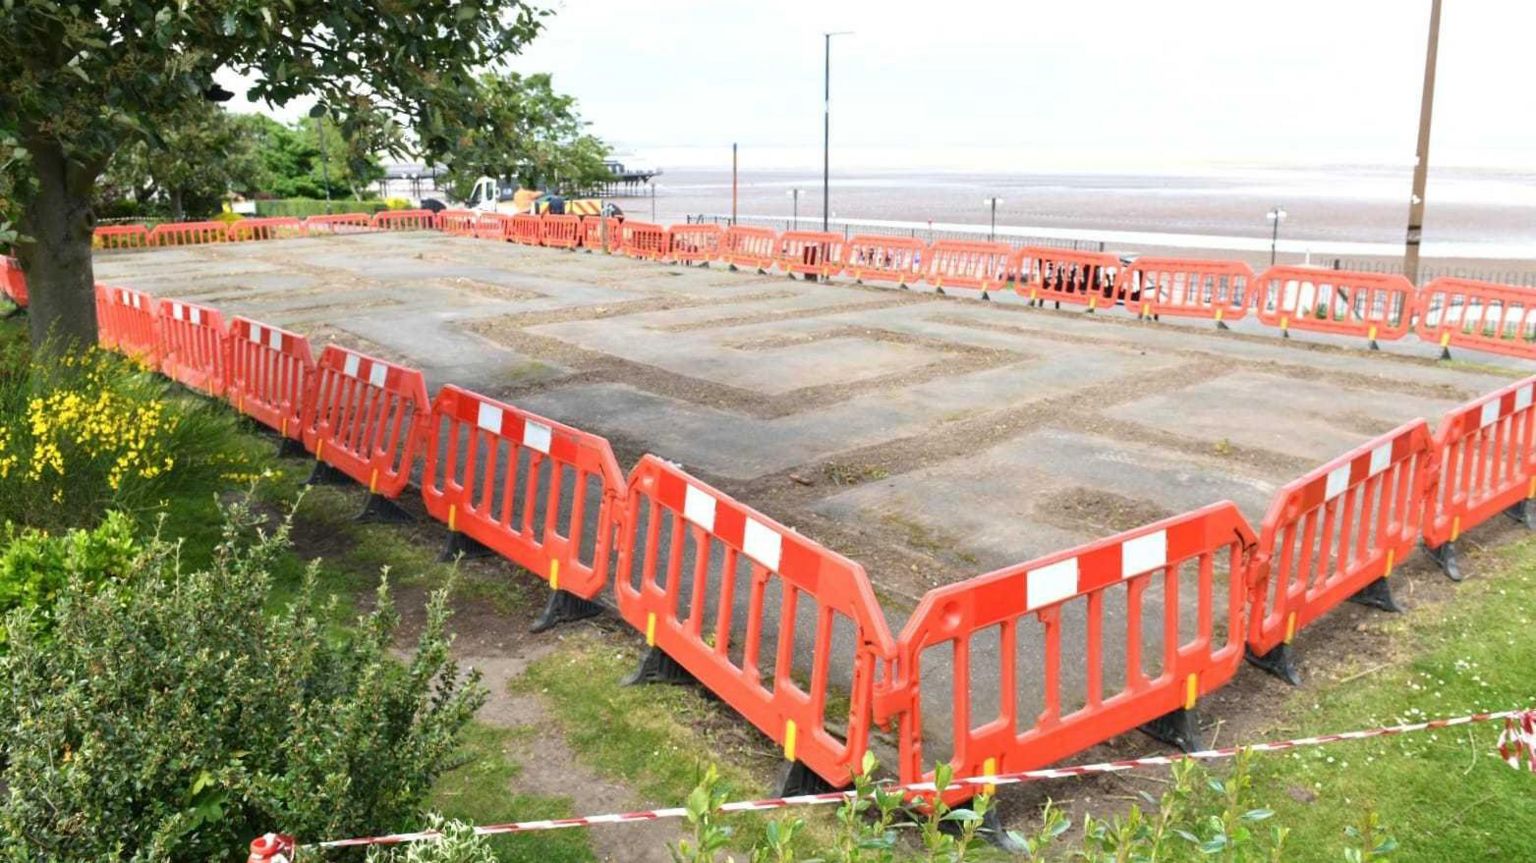 Pier Gardens, Cleethorpes, following the removal of the maze